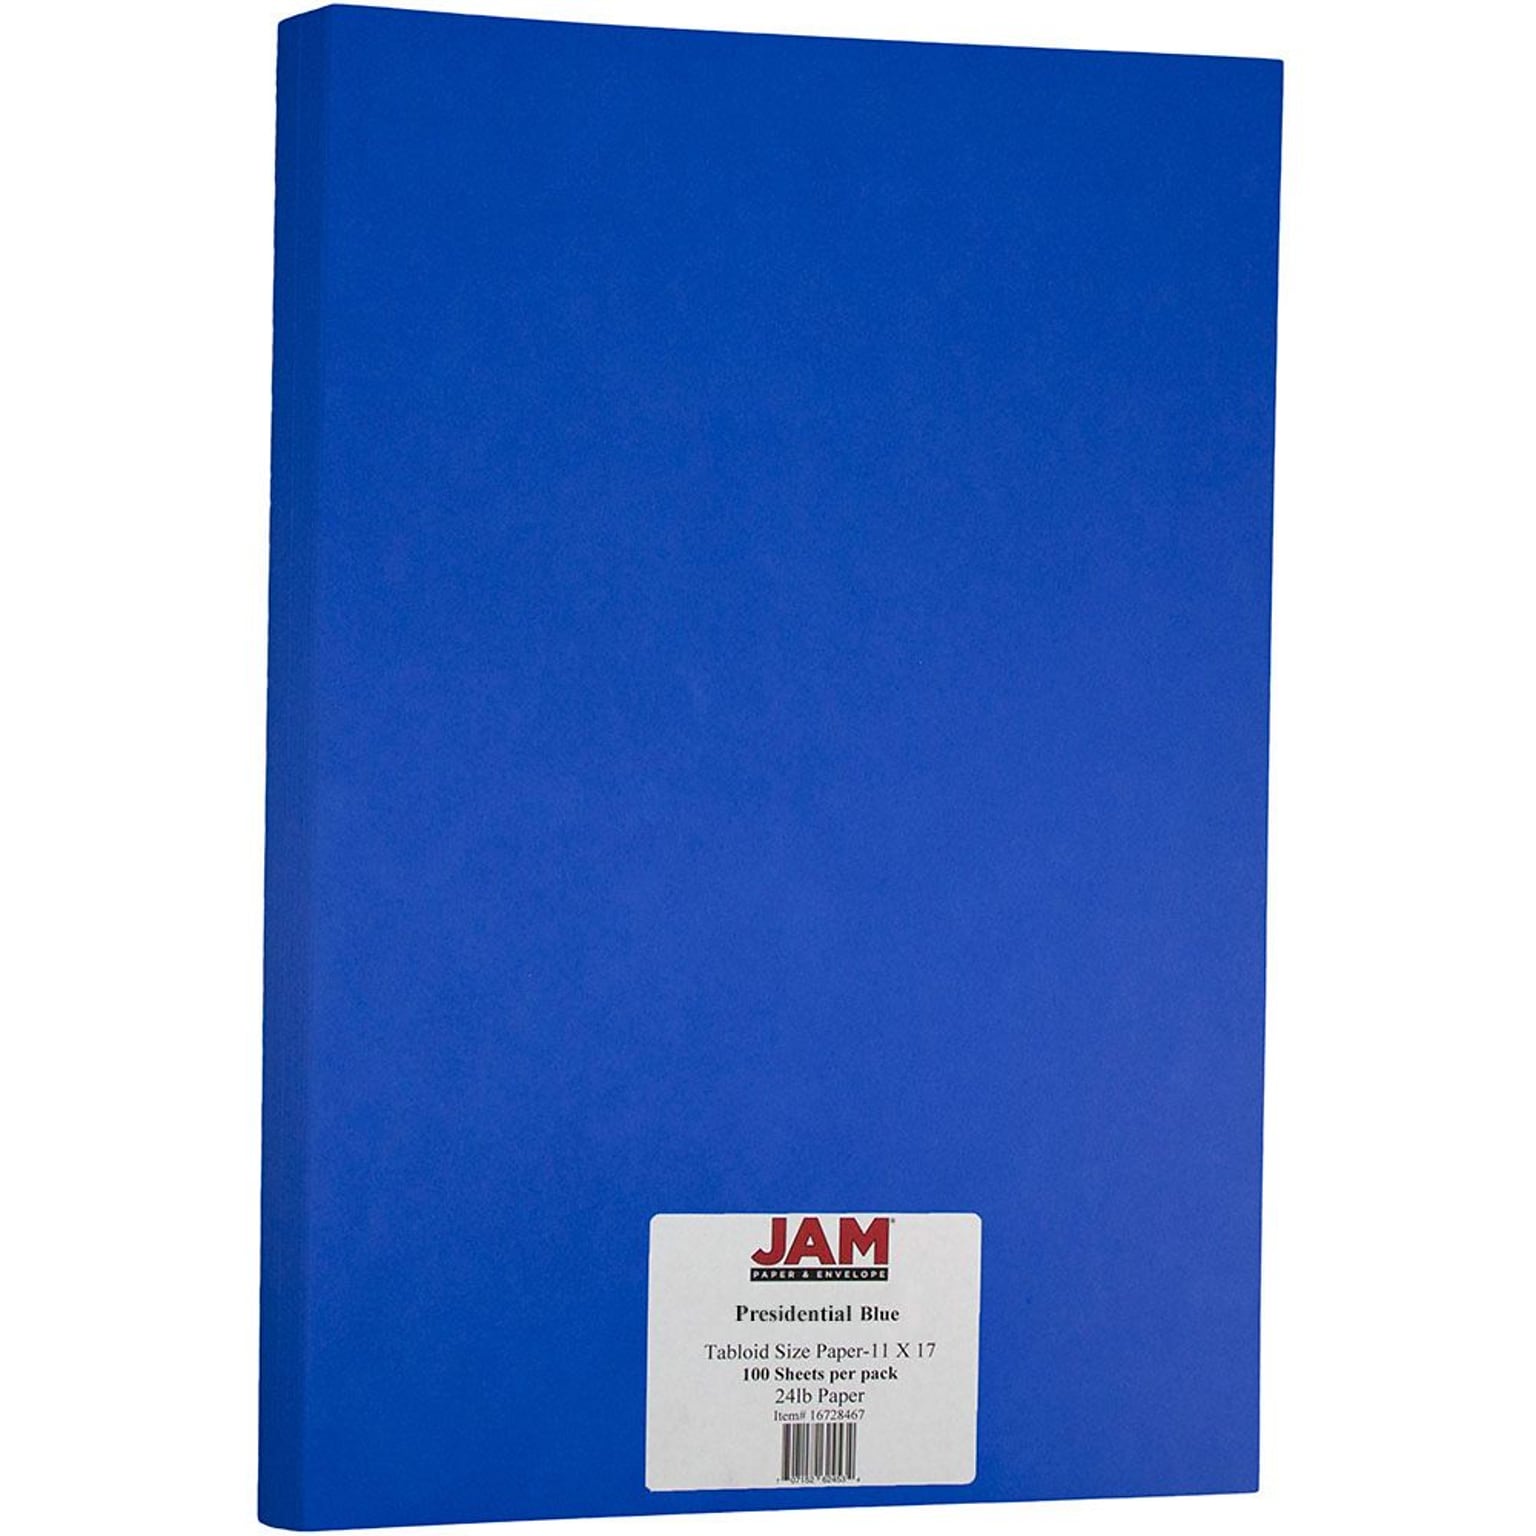 JAM Paper Matte Colored 11 x 17 Copy Paper, 24 lbs., Presidential Blue Recycled, 100 Sheets/Pack (16728467)